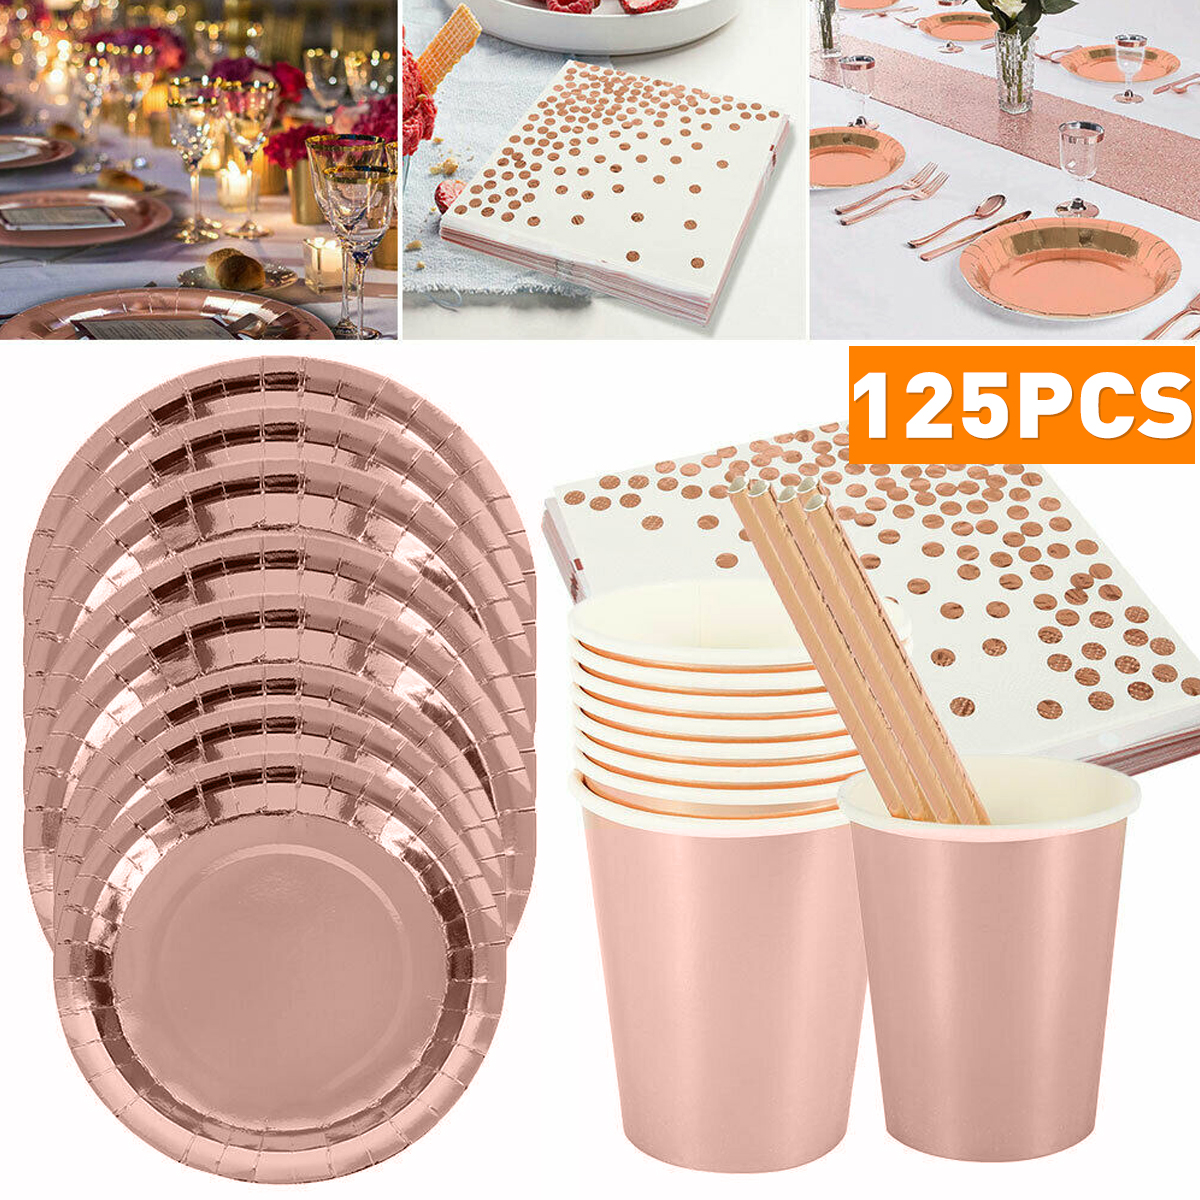 125pcs-Party-Disposable-Tableware-Set-Festival-Paper-Cups-Camping-Fork-Spoon-Rose-Gold-Plates-Straws-1662319-2